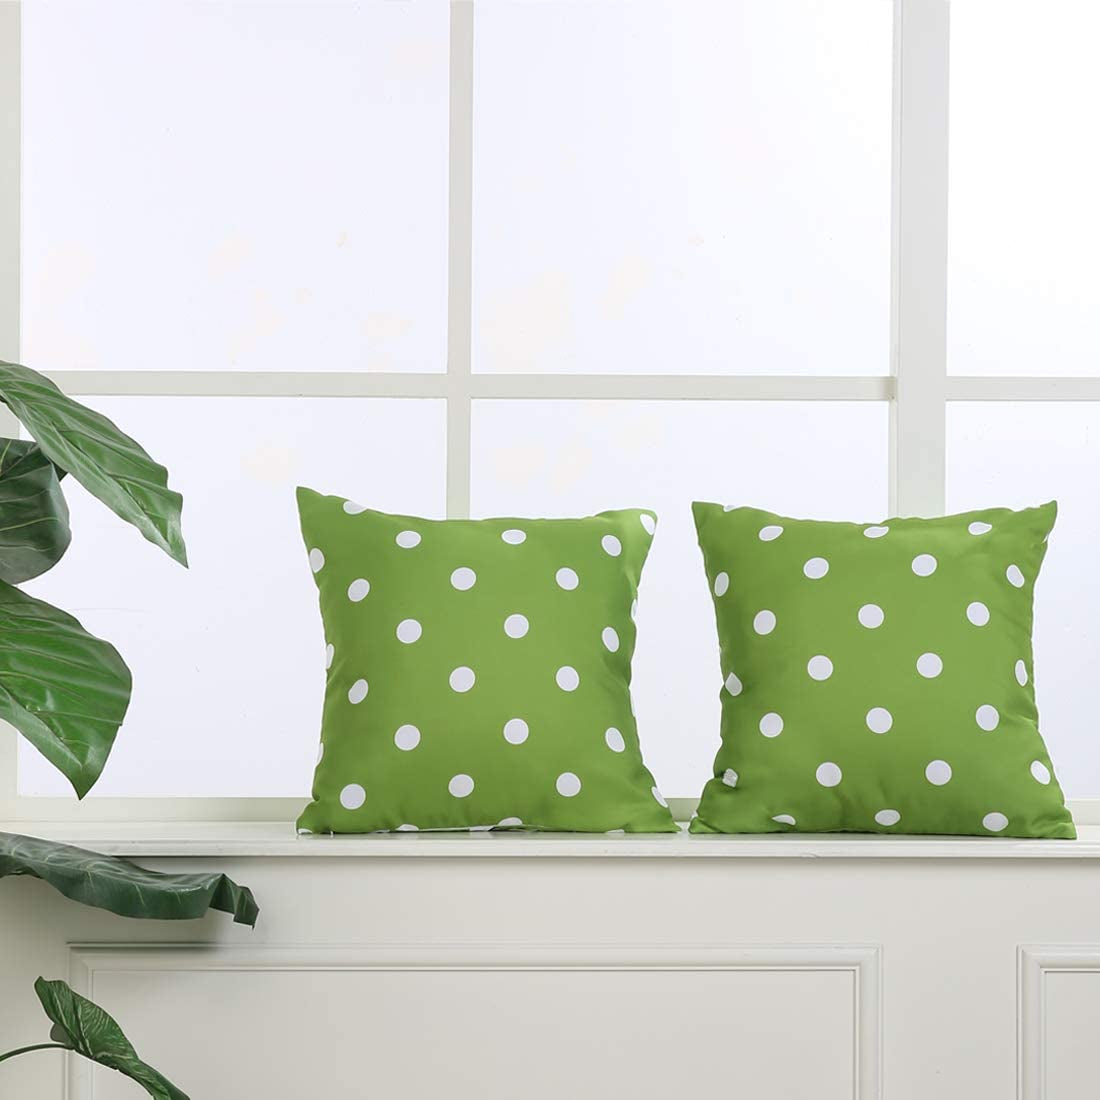 Set of 2 Outdoor Pillow Covers Waterproof Throw Pillow Covers for Christmas Outdoor Patio Furniture, Green Polka Dot, 18X18 Inches